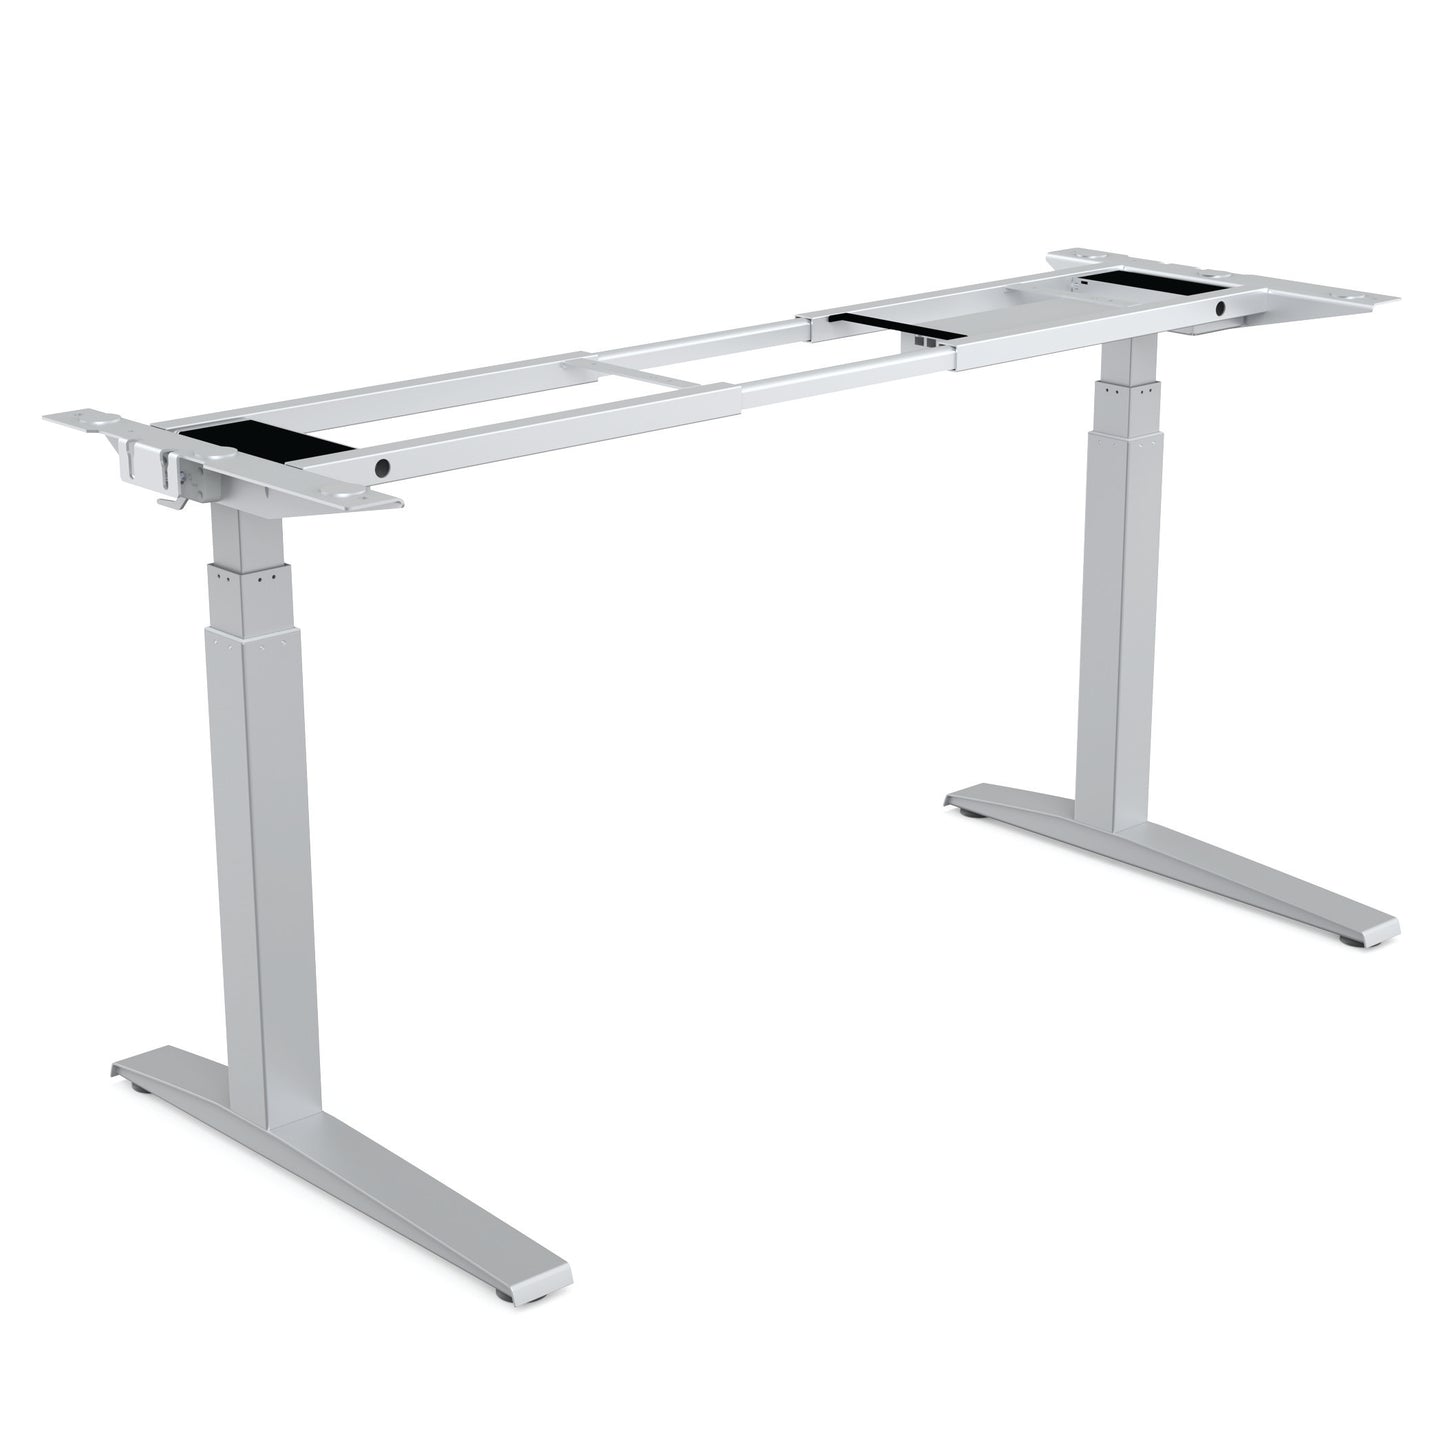 BUY FELOOWES Levado Height Adjustable Desk FREE SHIPPING 8949401. Standing desk/sit stand desk/stand up desk available with base only